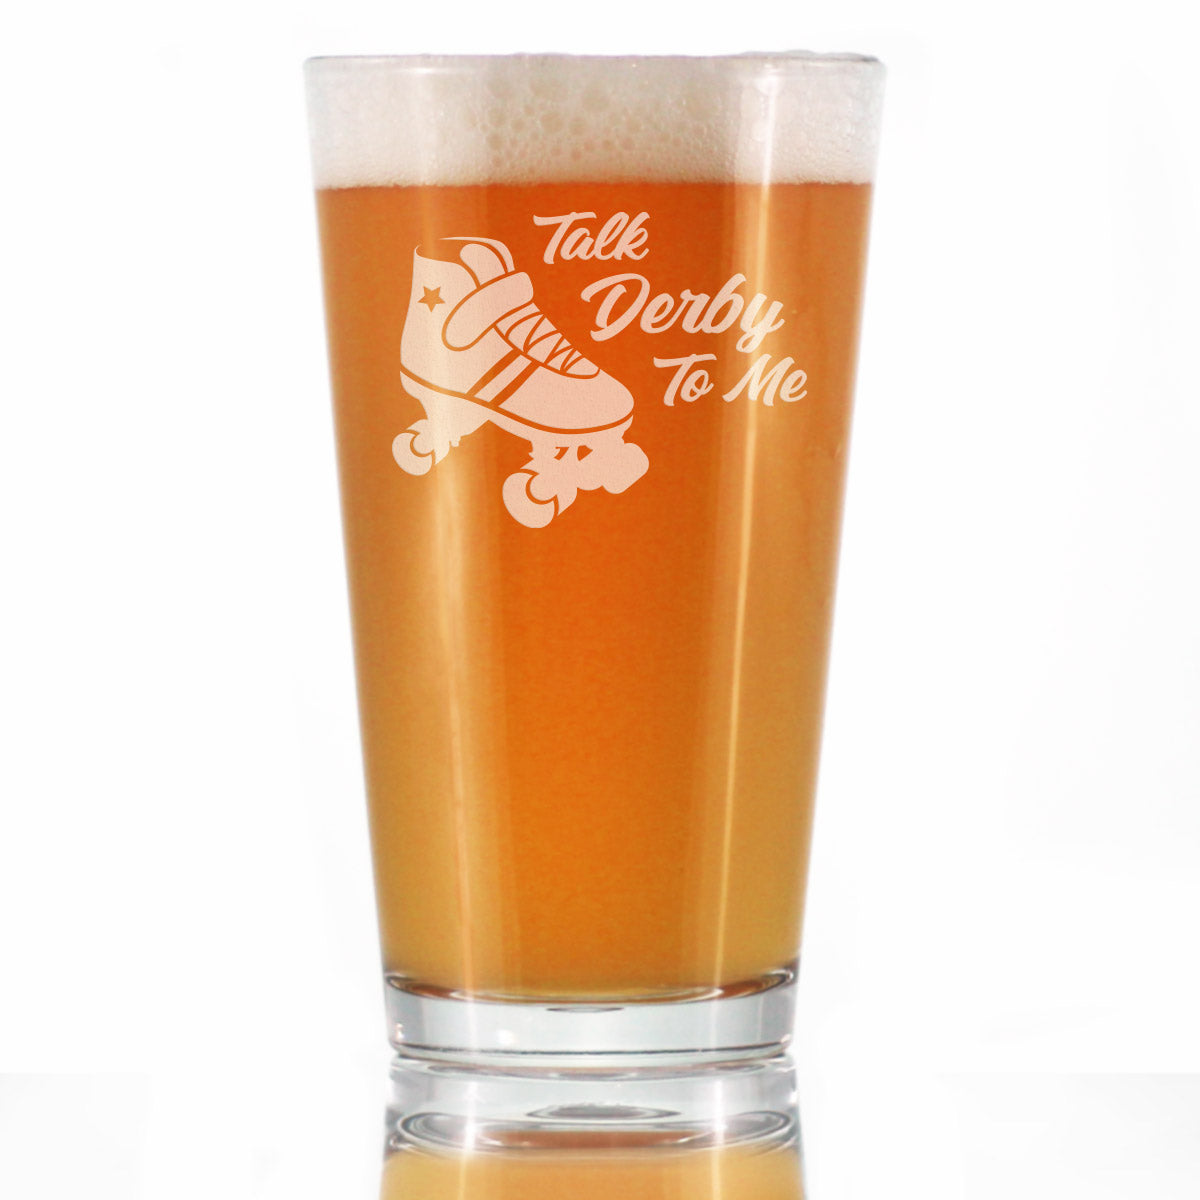 Talk Derby To Me - Pint Glass for Beer - Funny Rollerblading Gifts and Decor for Men &amp; Women - 16 Oz Glasses